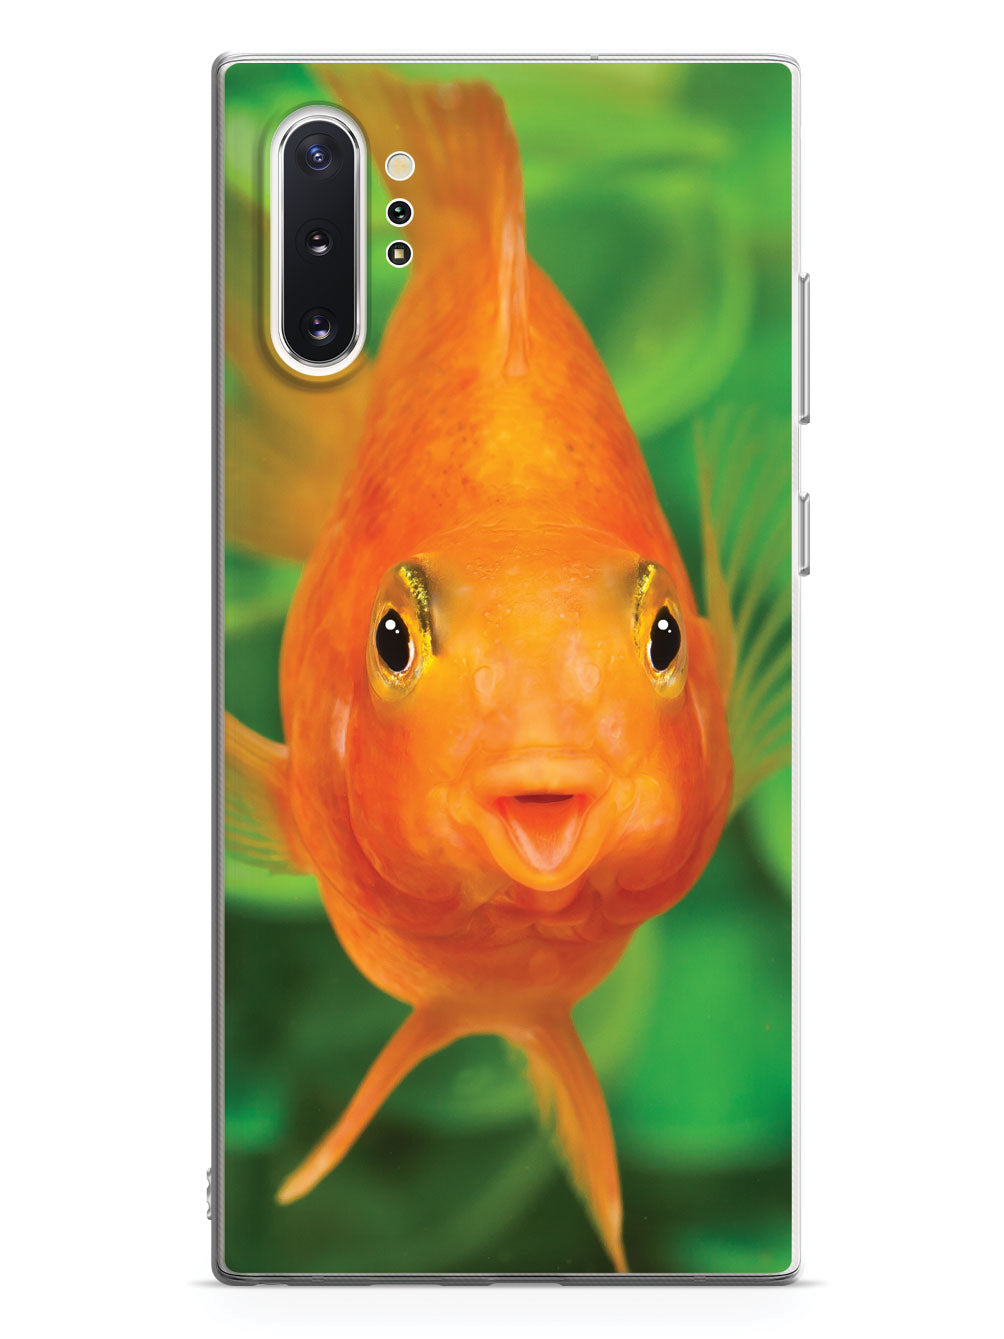 Cute And Funny Goldfish - White Case